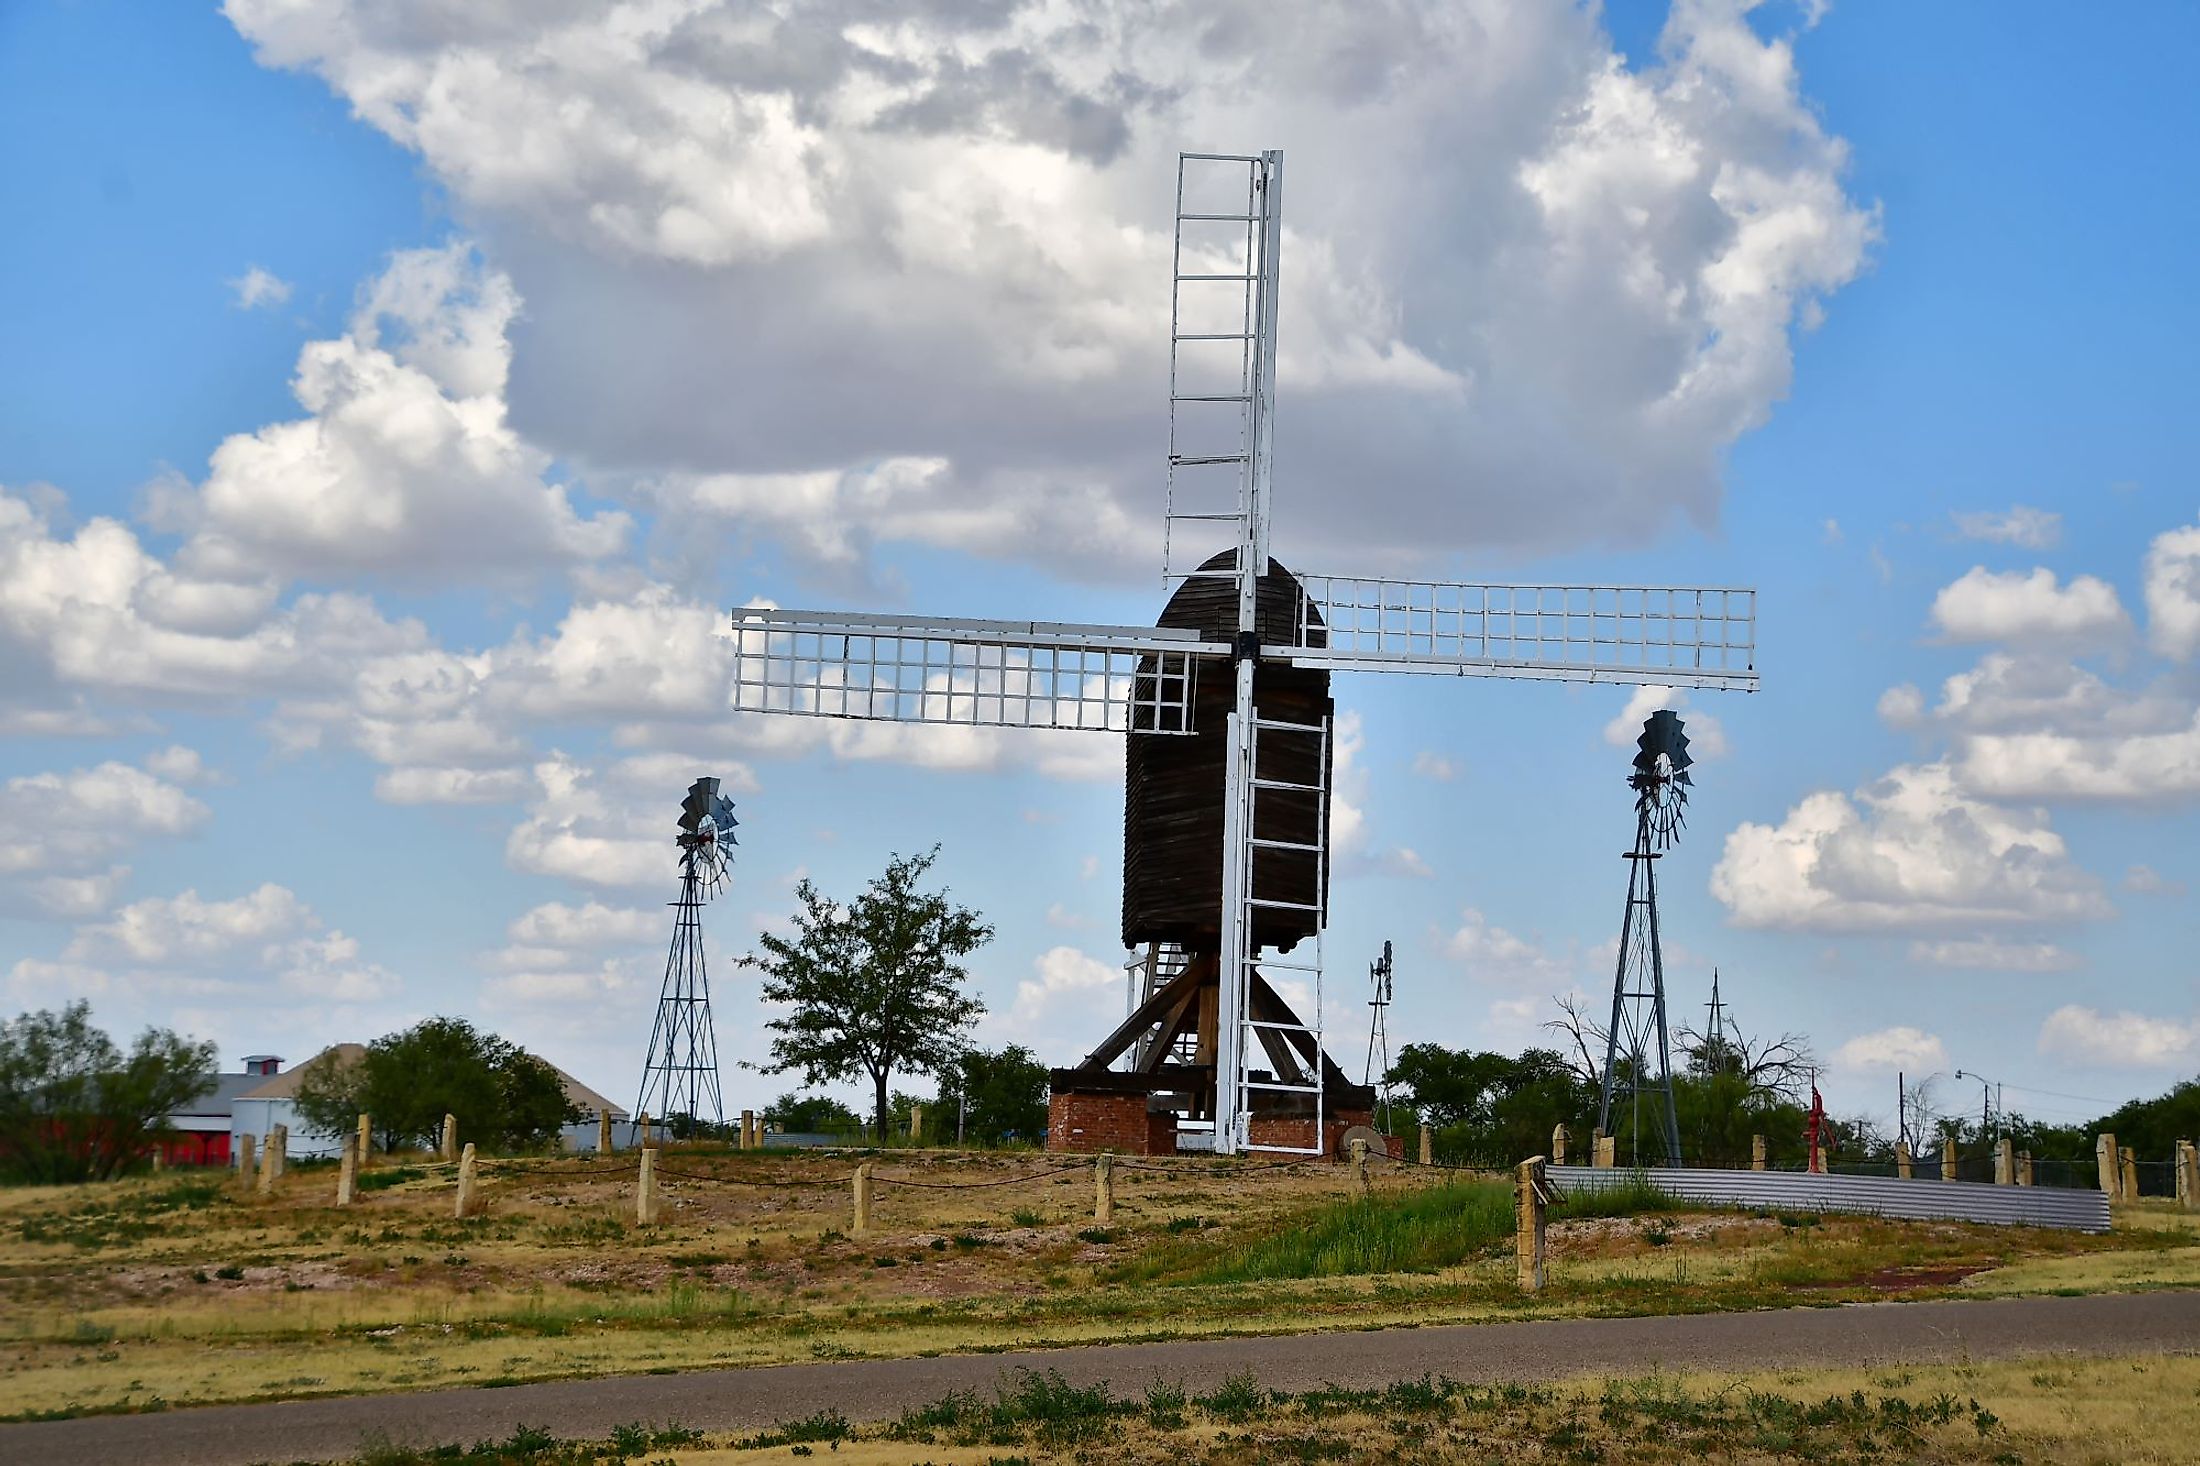 Windmill on display at the Windmill Museum in Lubbock, Texas